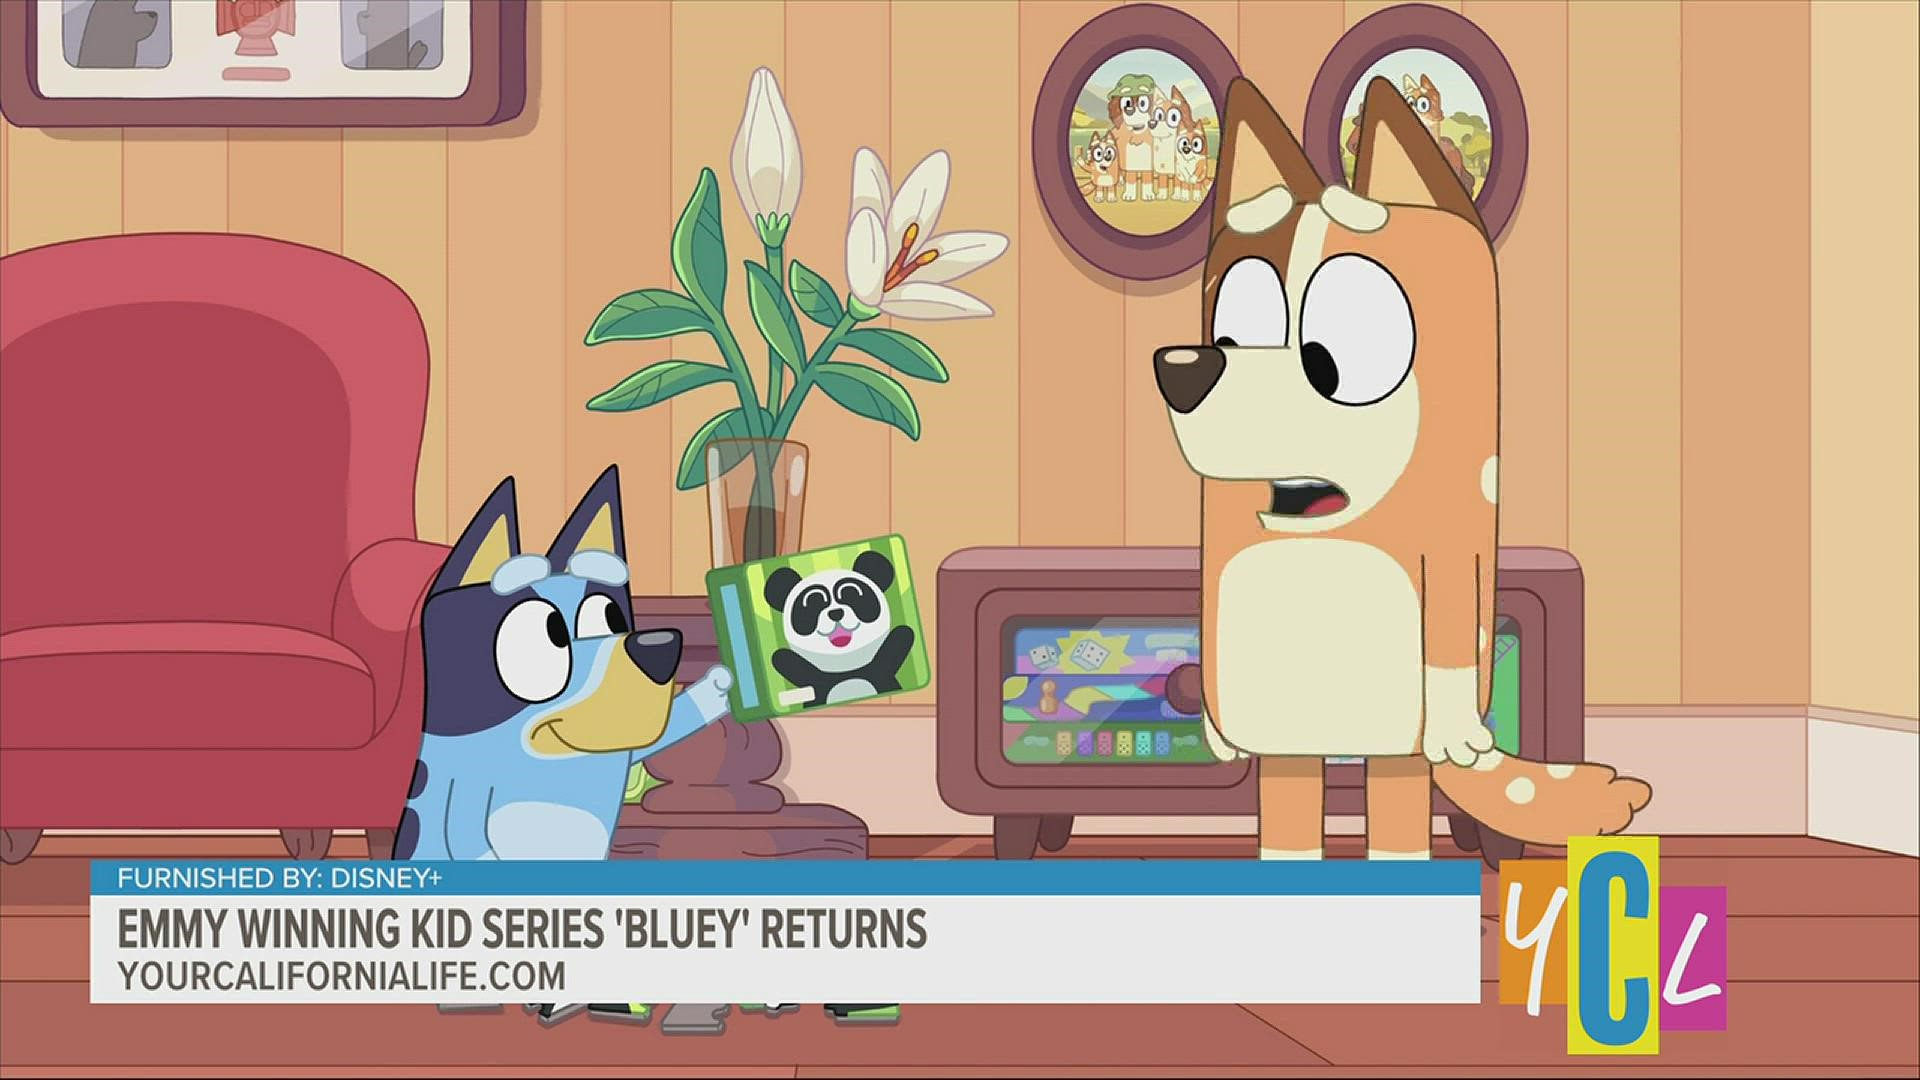 Bluey season 3 is out now and we spoke with the show’s producers about why the show has resonated so strongly with parents everywhere and what makes it so special.